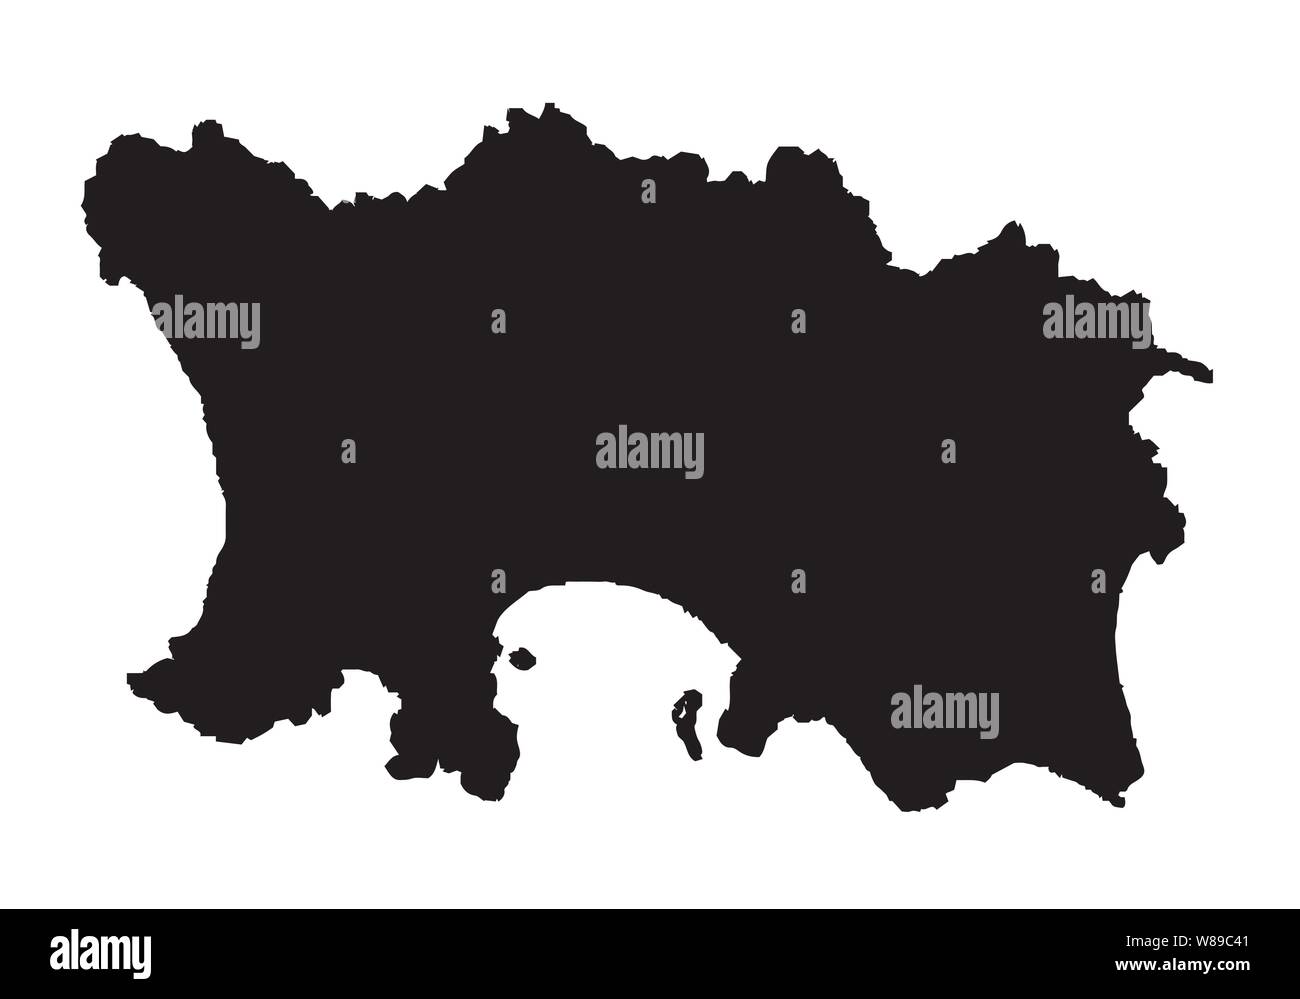 Silhouette outline map of The Channel Island of Jersey over a white background Stock Vector